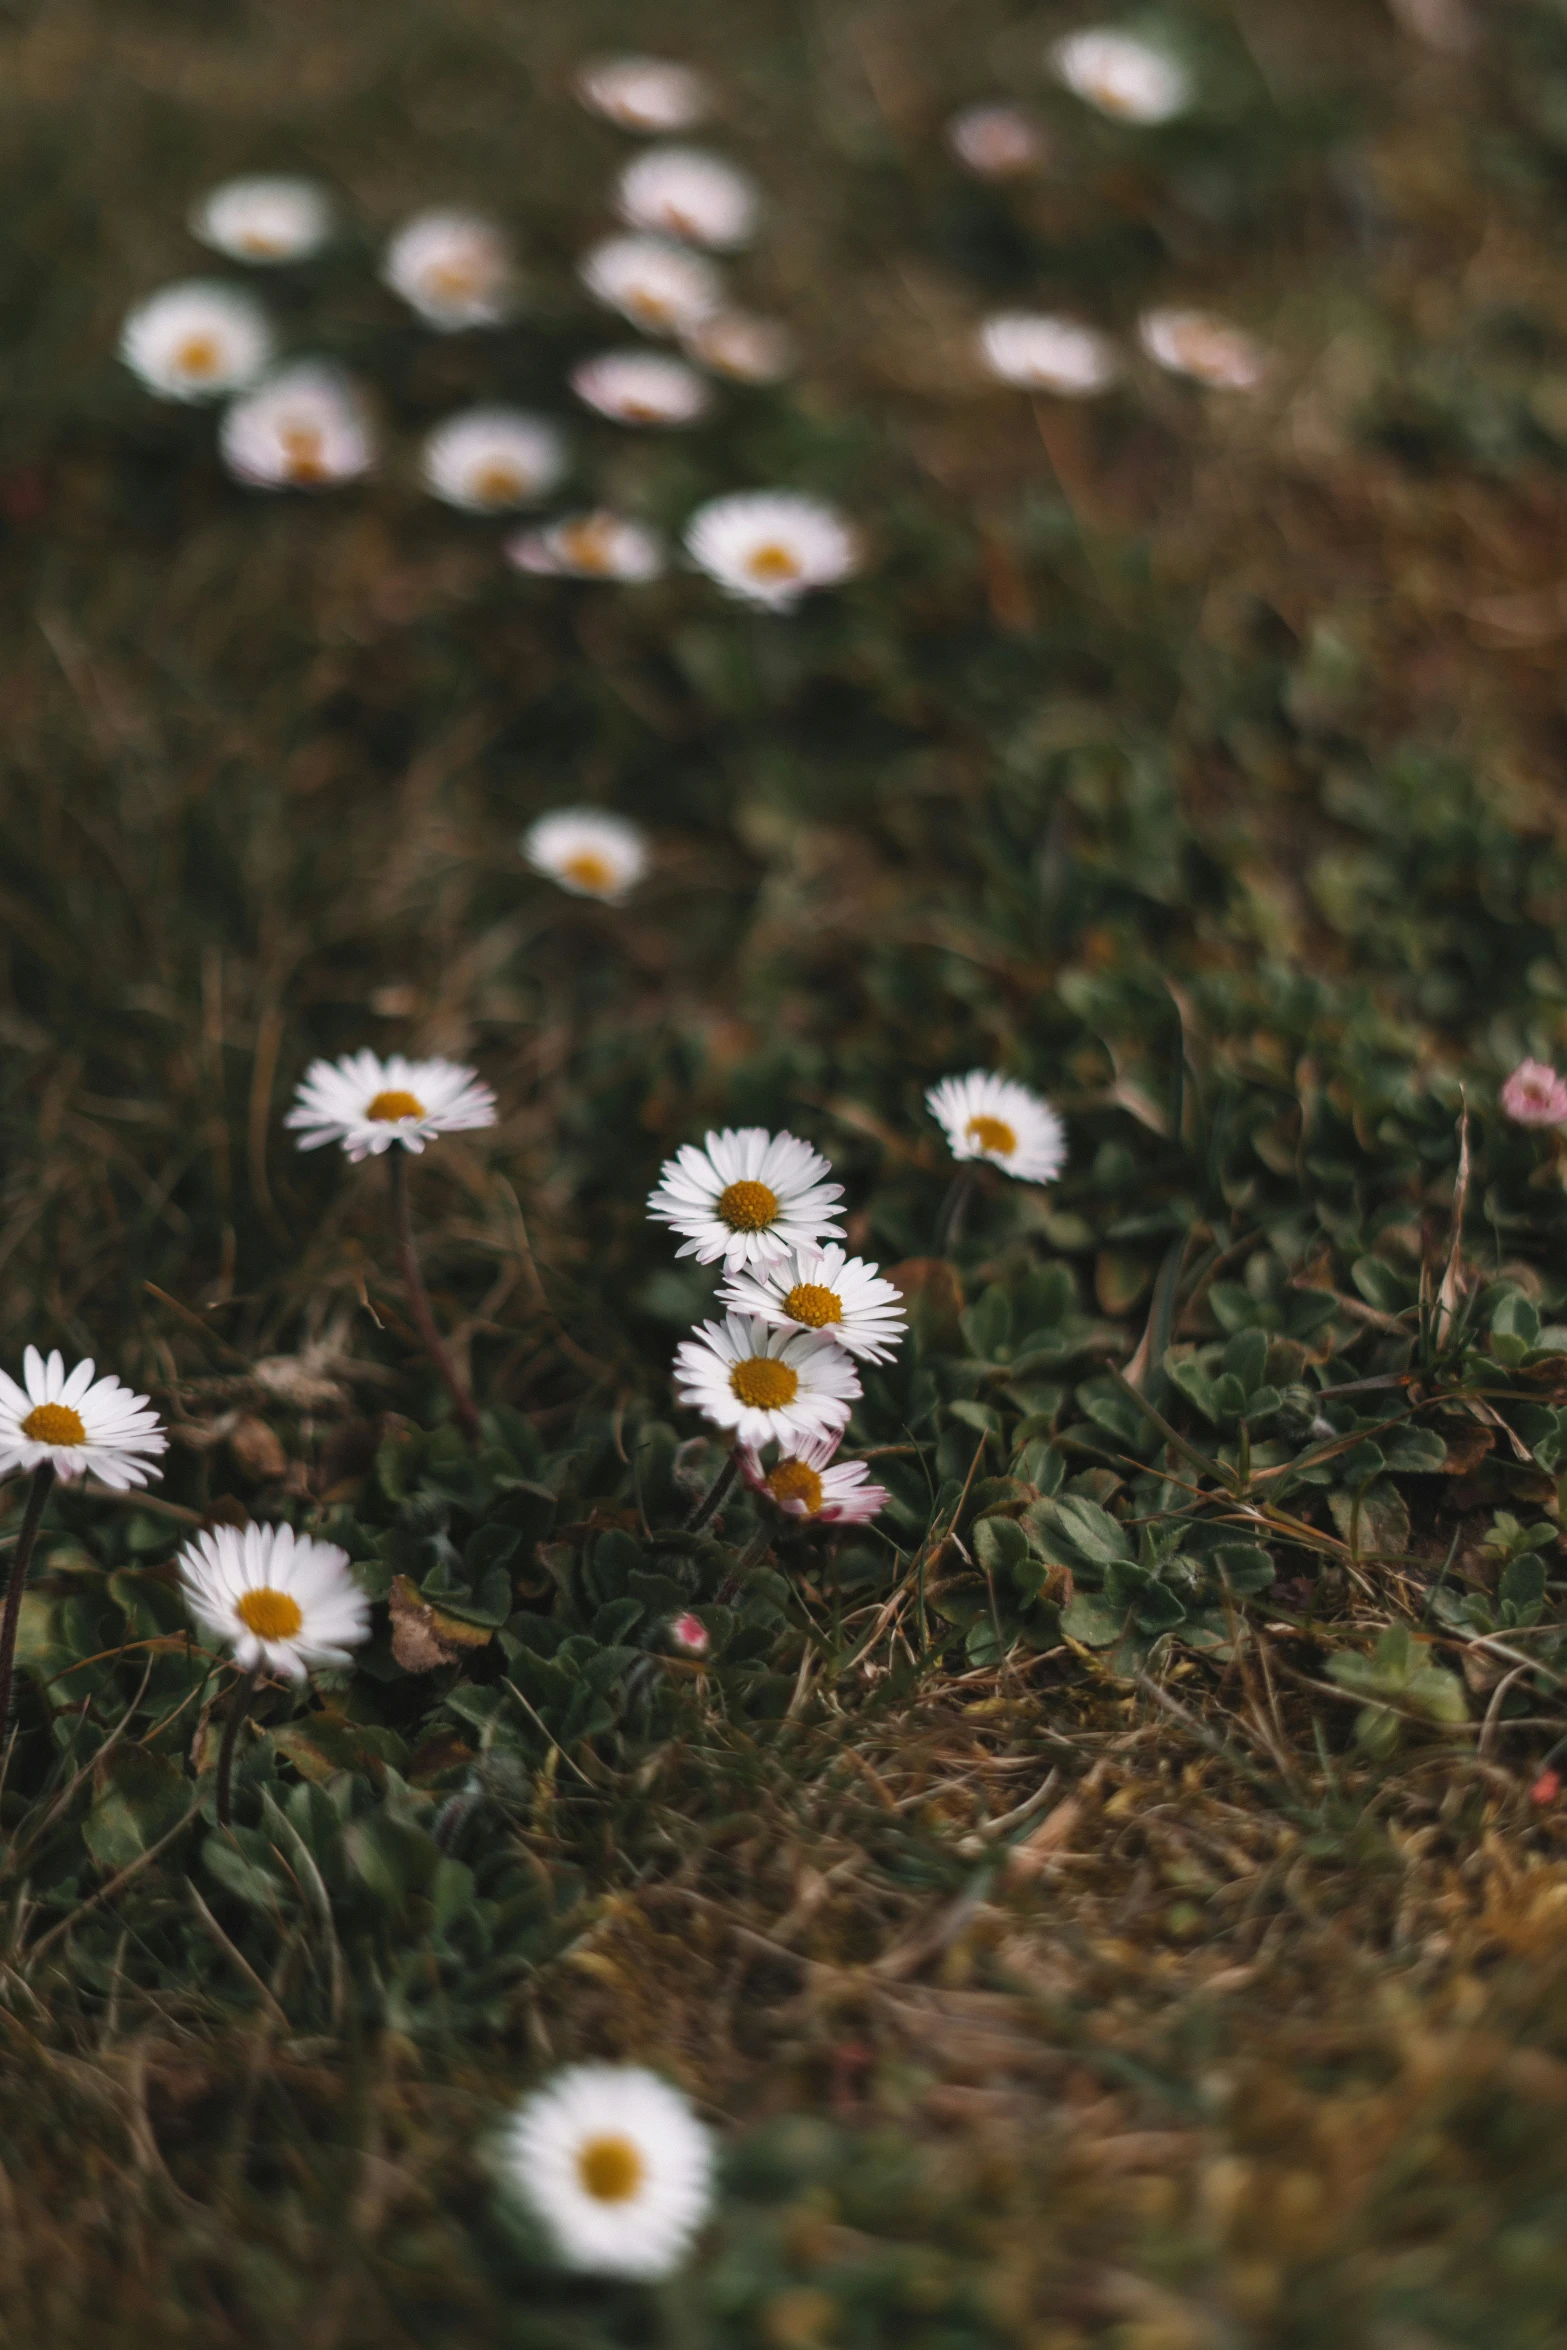 daisy flowers sitting on the ground next to some grass